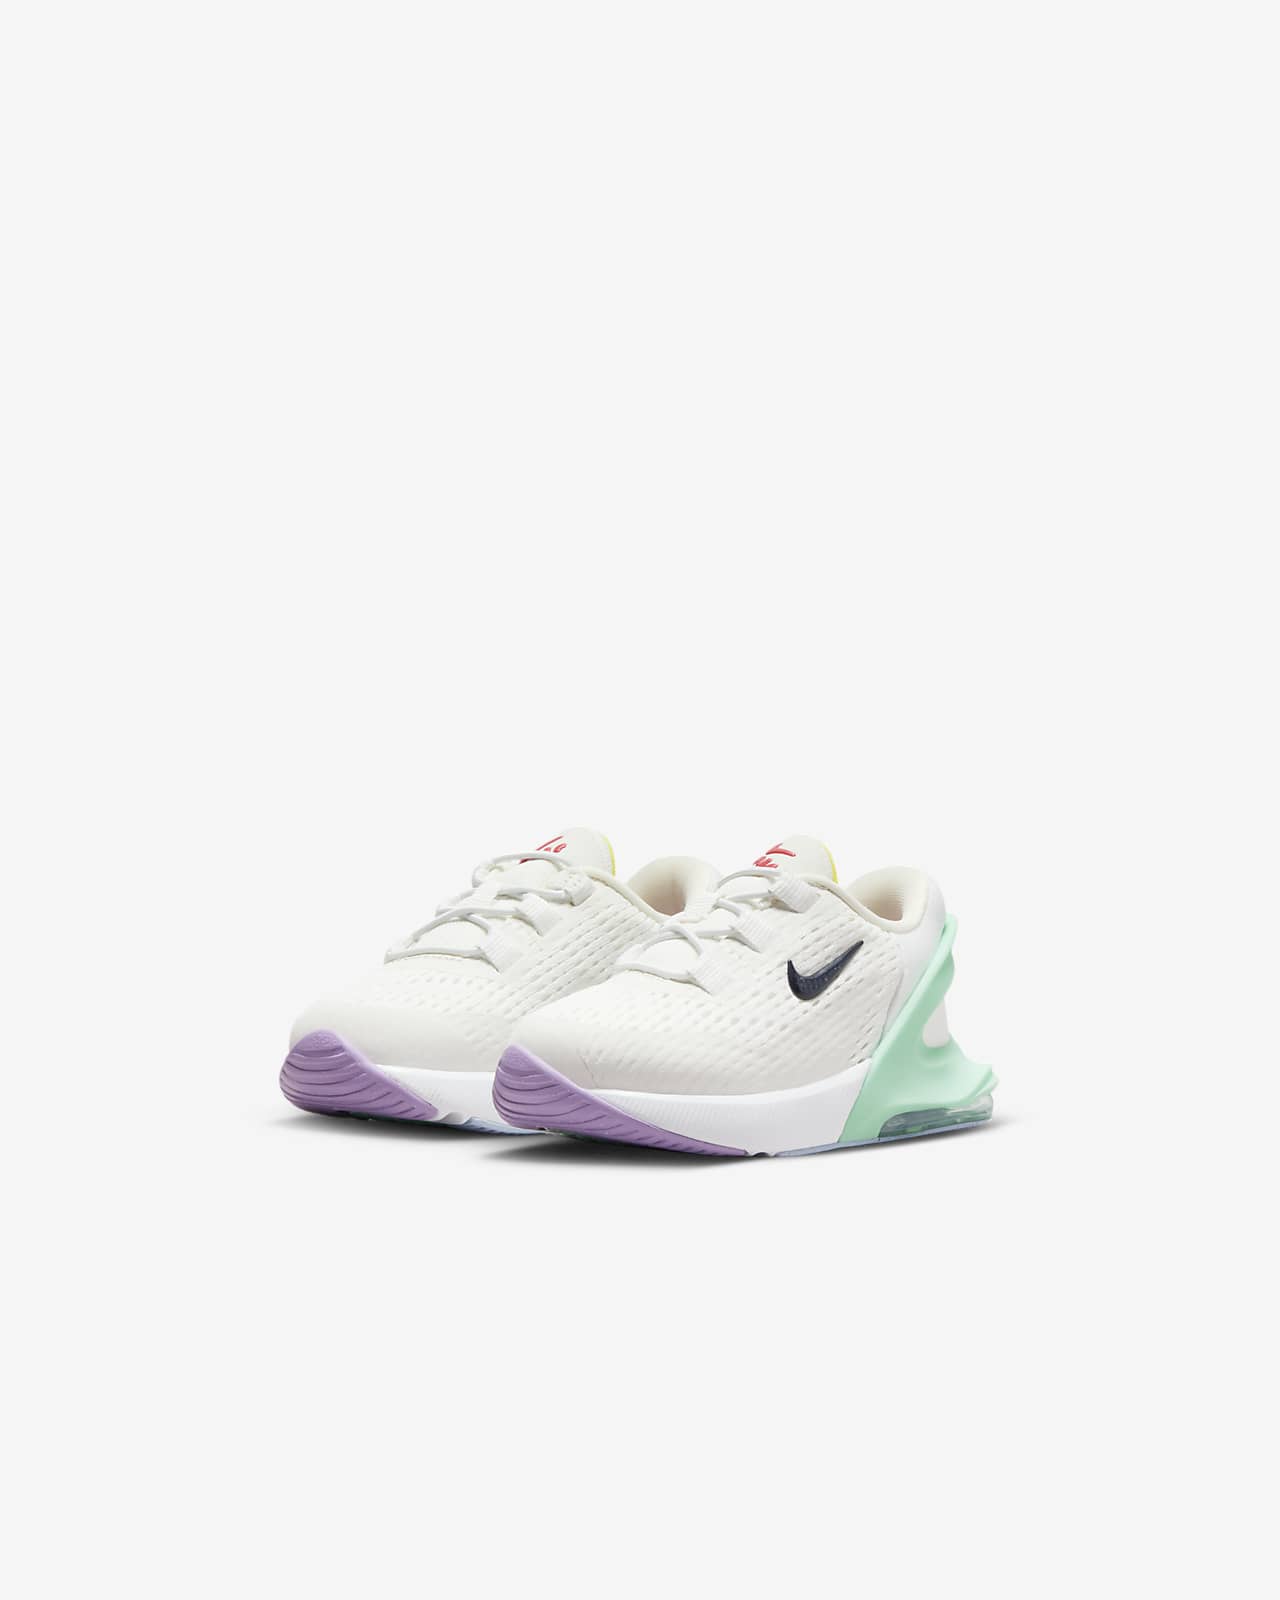 Nombre provisional sentido varonil Nike Air Max 270 GO Baby/Toddler Easy On/Off Shoes. Nike.com